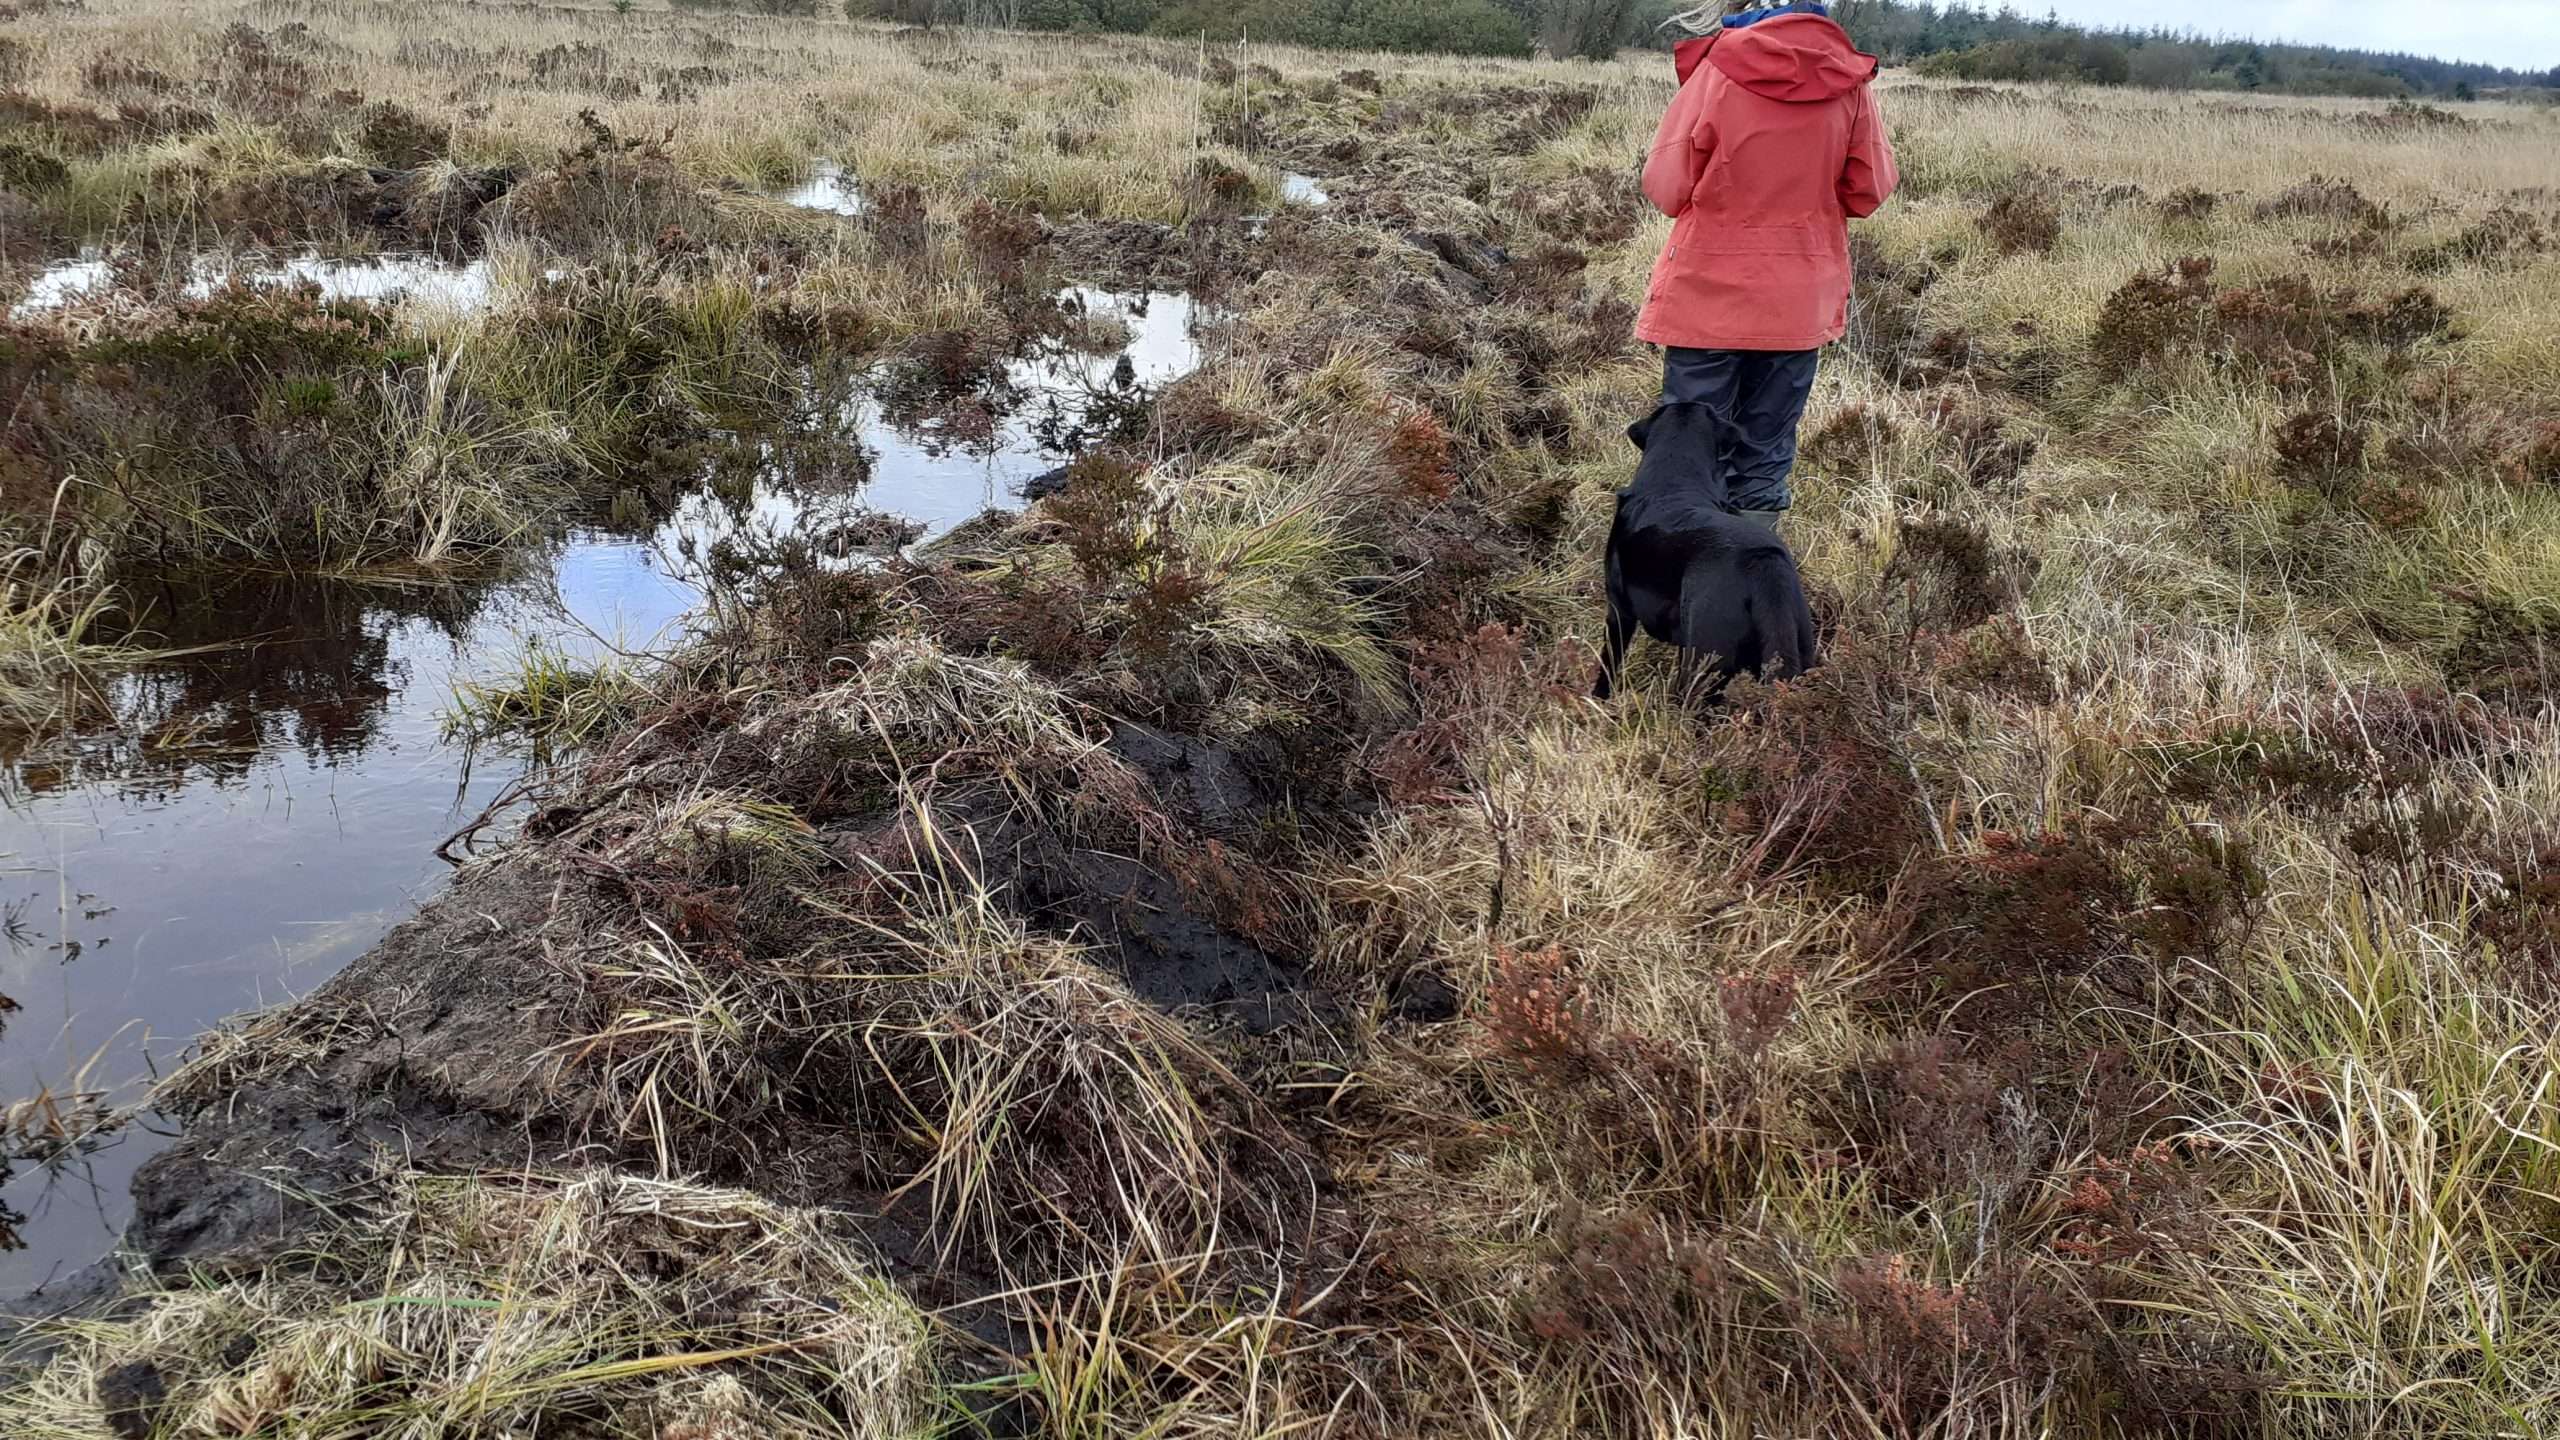 Rural Conservation Section undertakes work to restore valuable raised peat bog in Llanfynydd